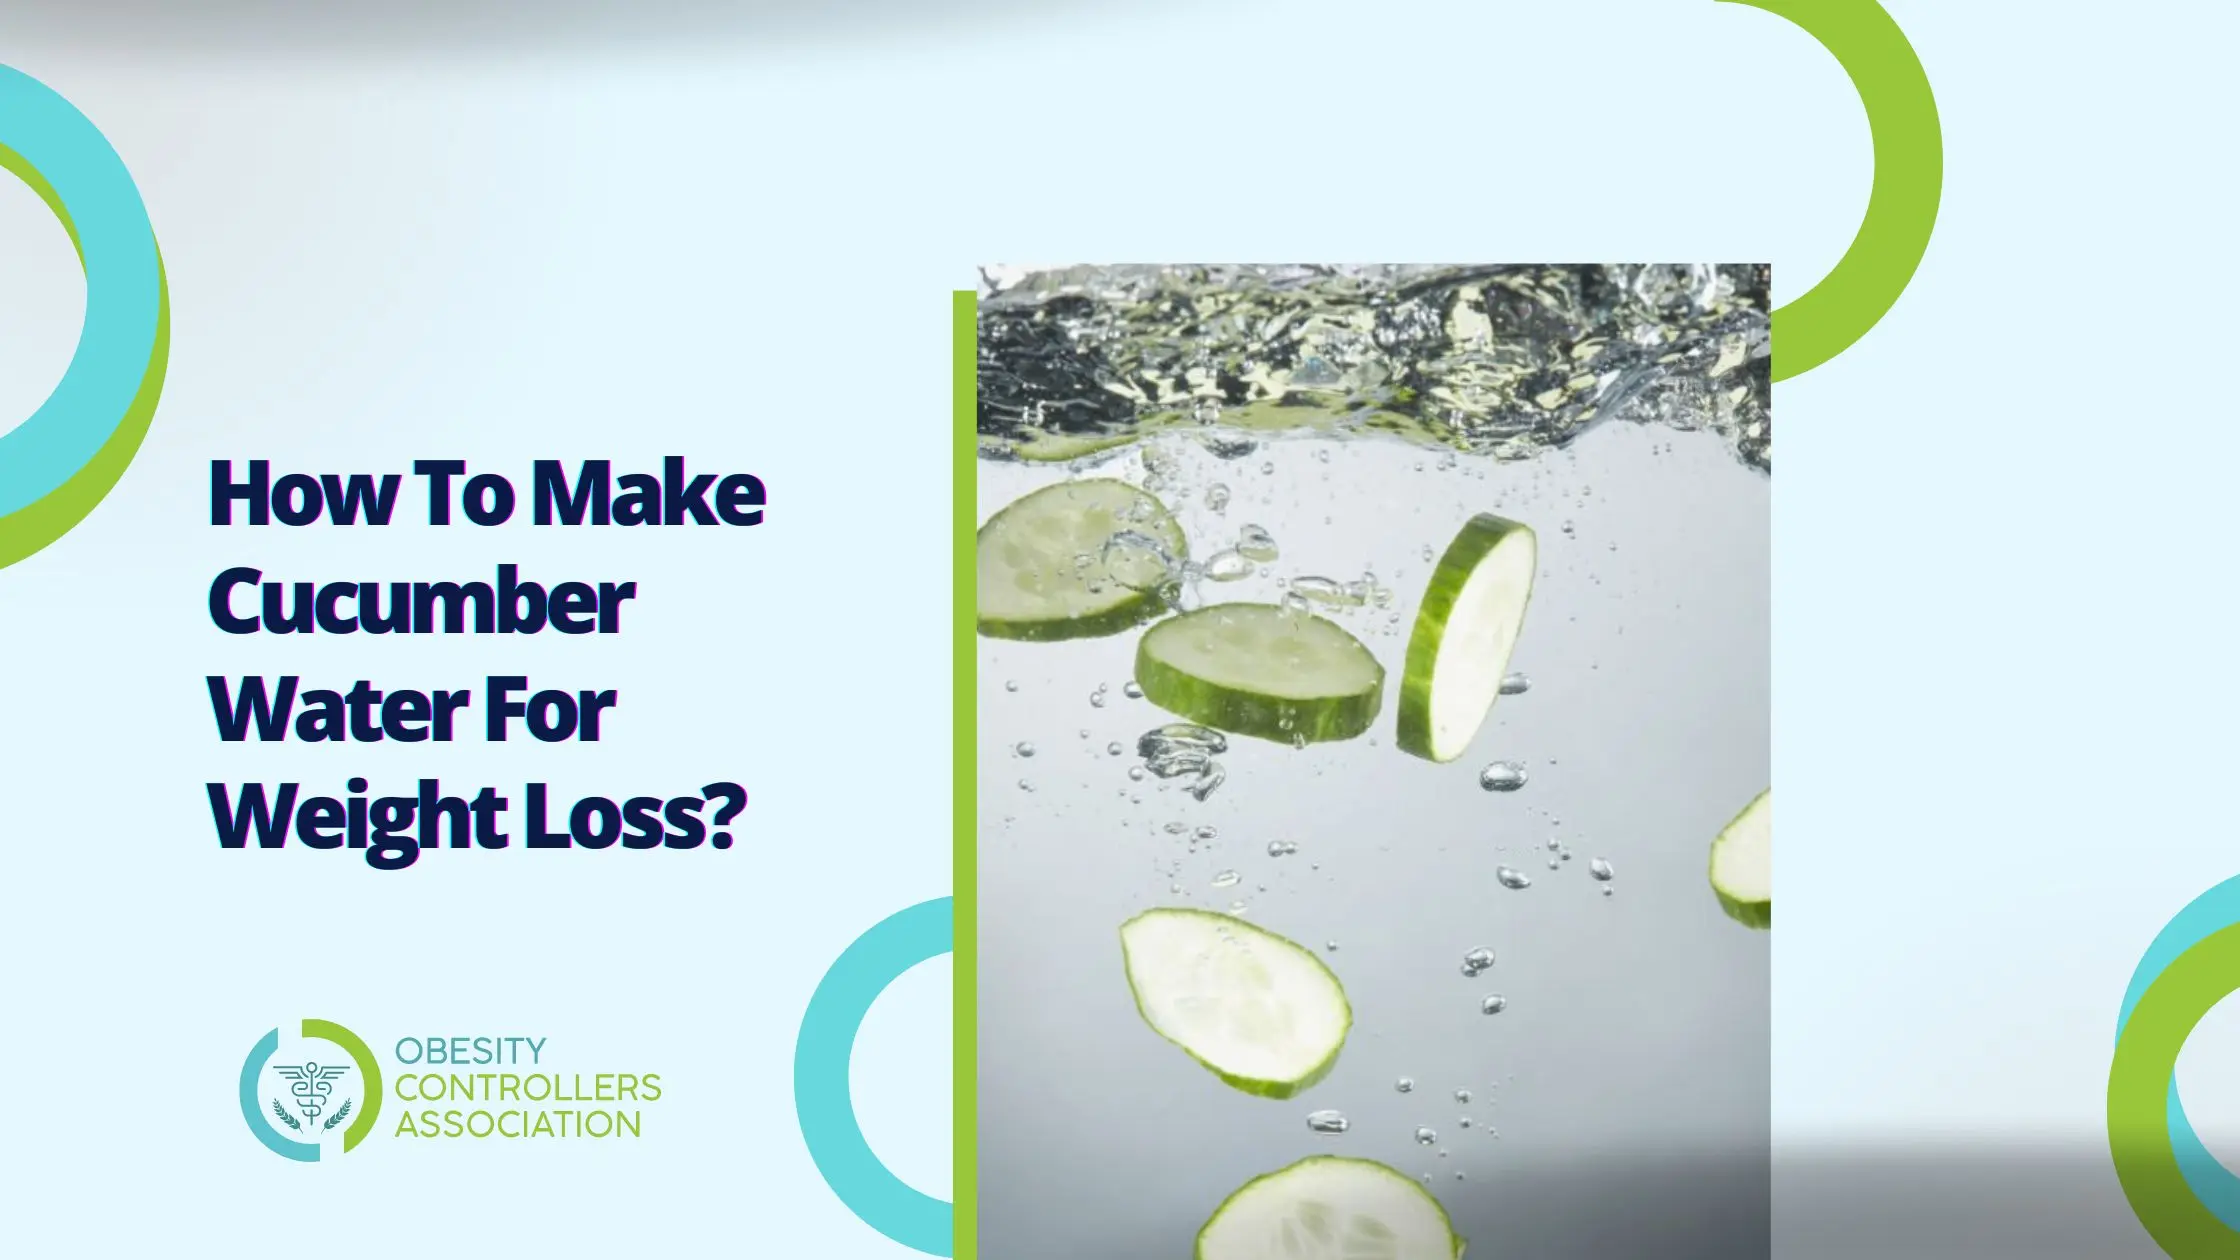 Make Cucumber Water For Weight Loss